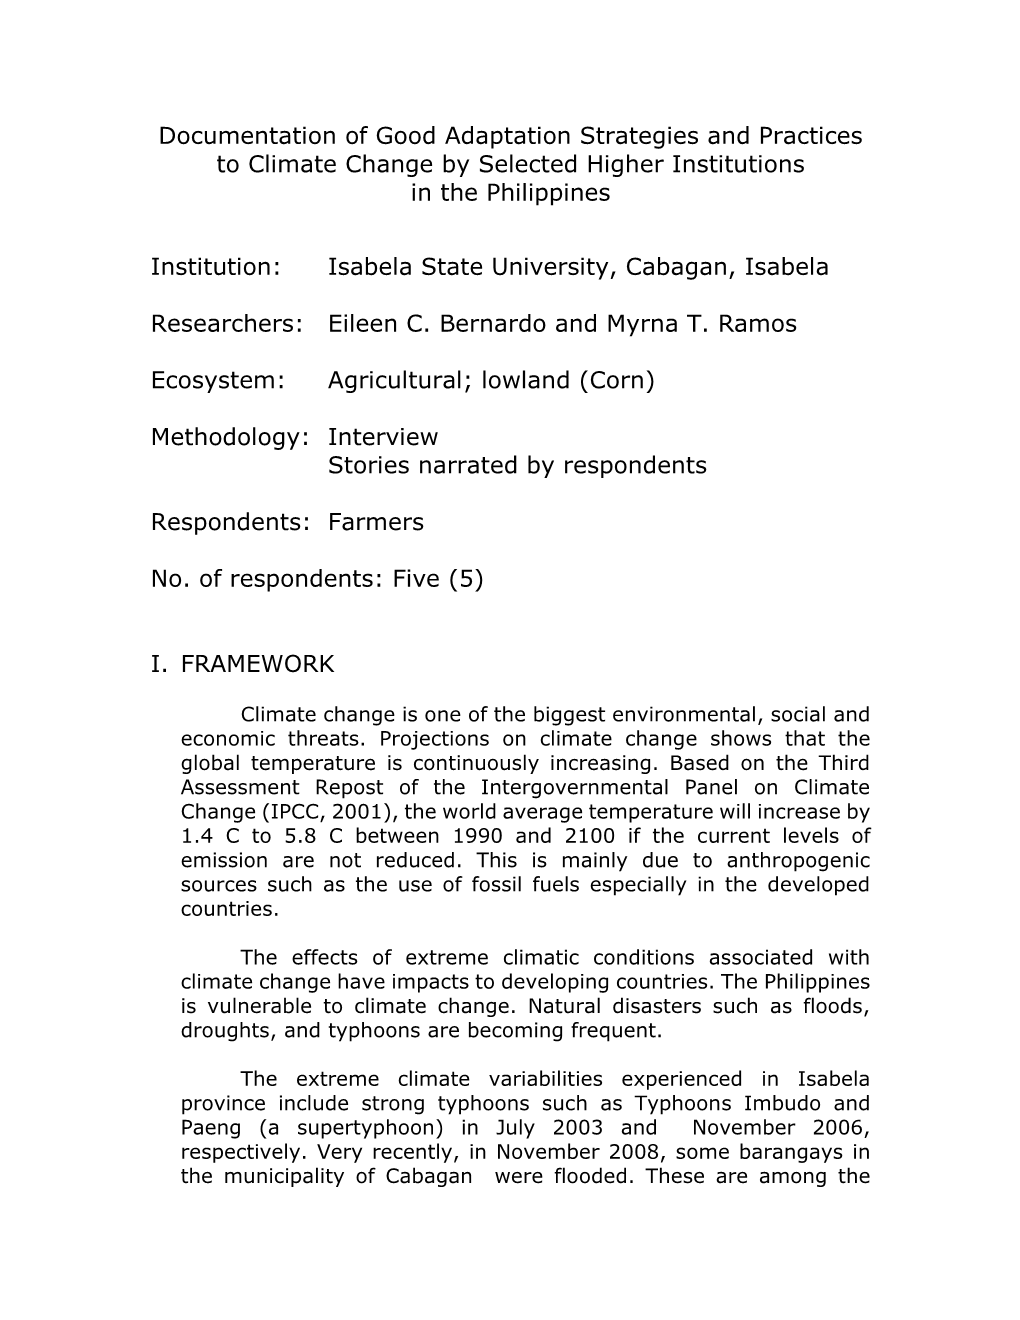 Documentation of Good Adaptation Strategies and Practices to Climate Change by Selected Higher Institutions in the Philippines